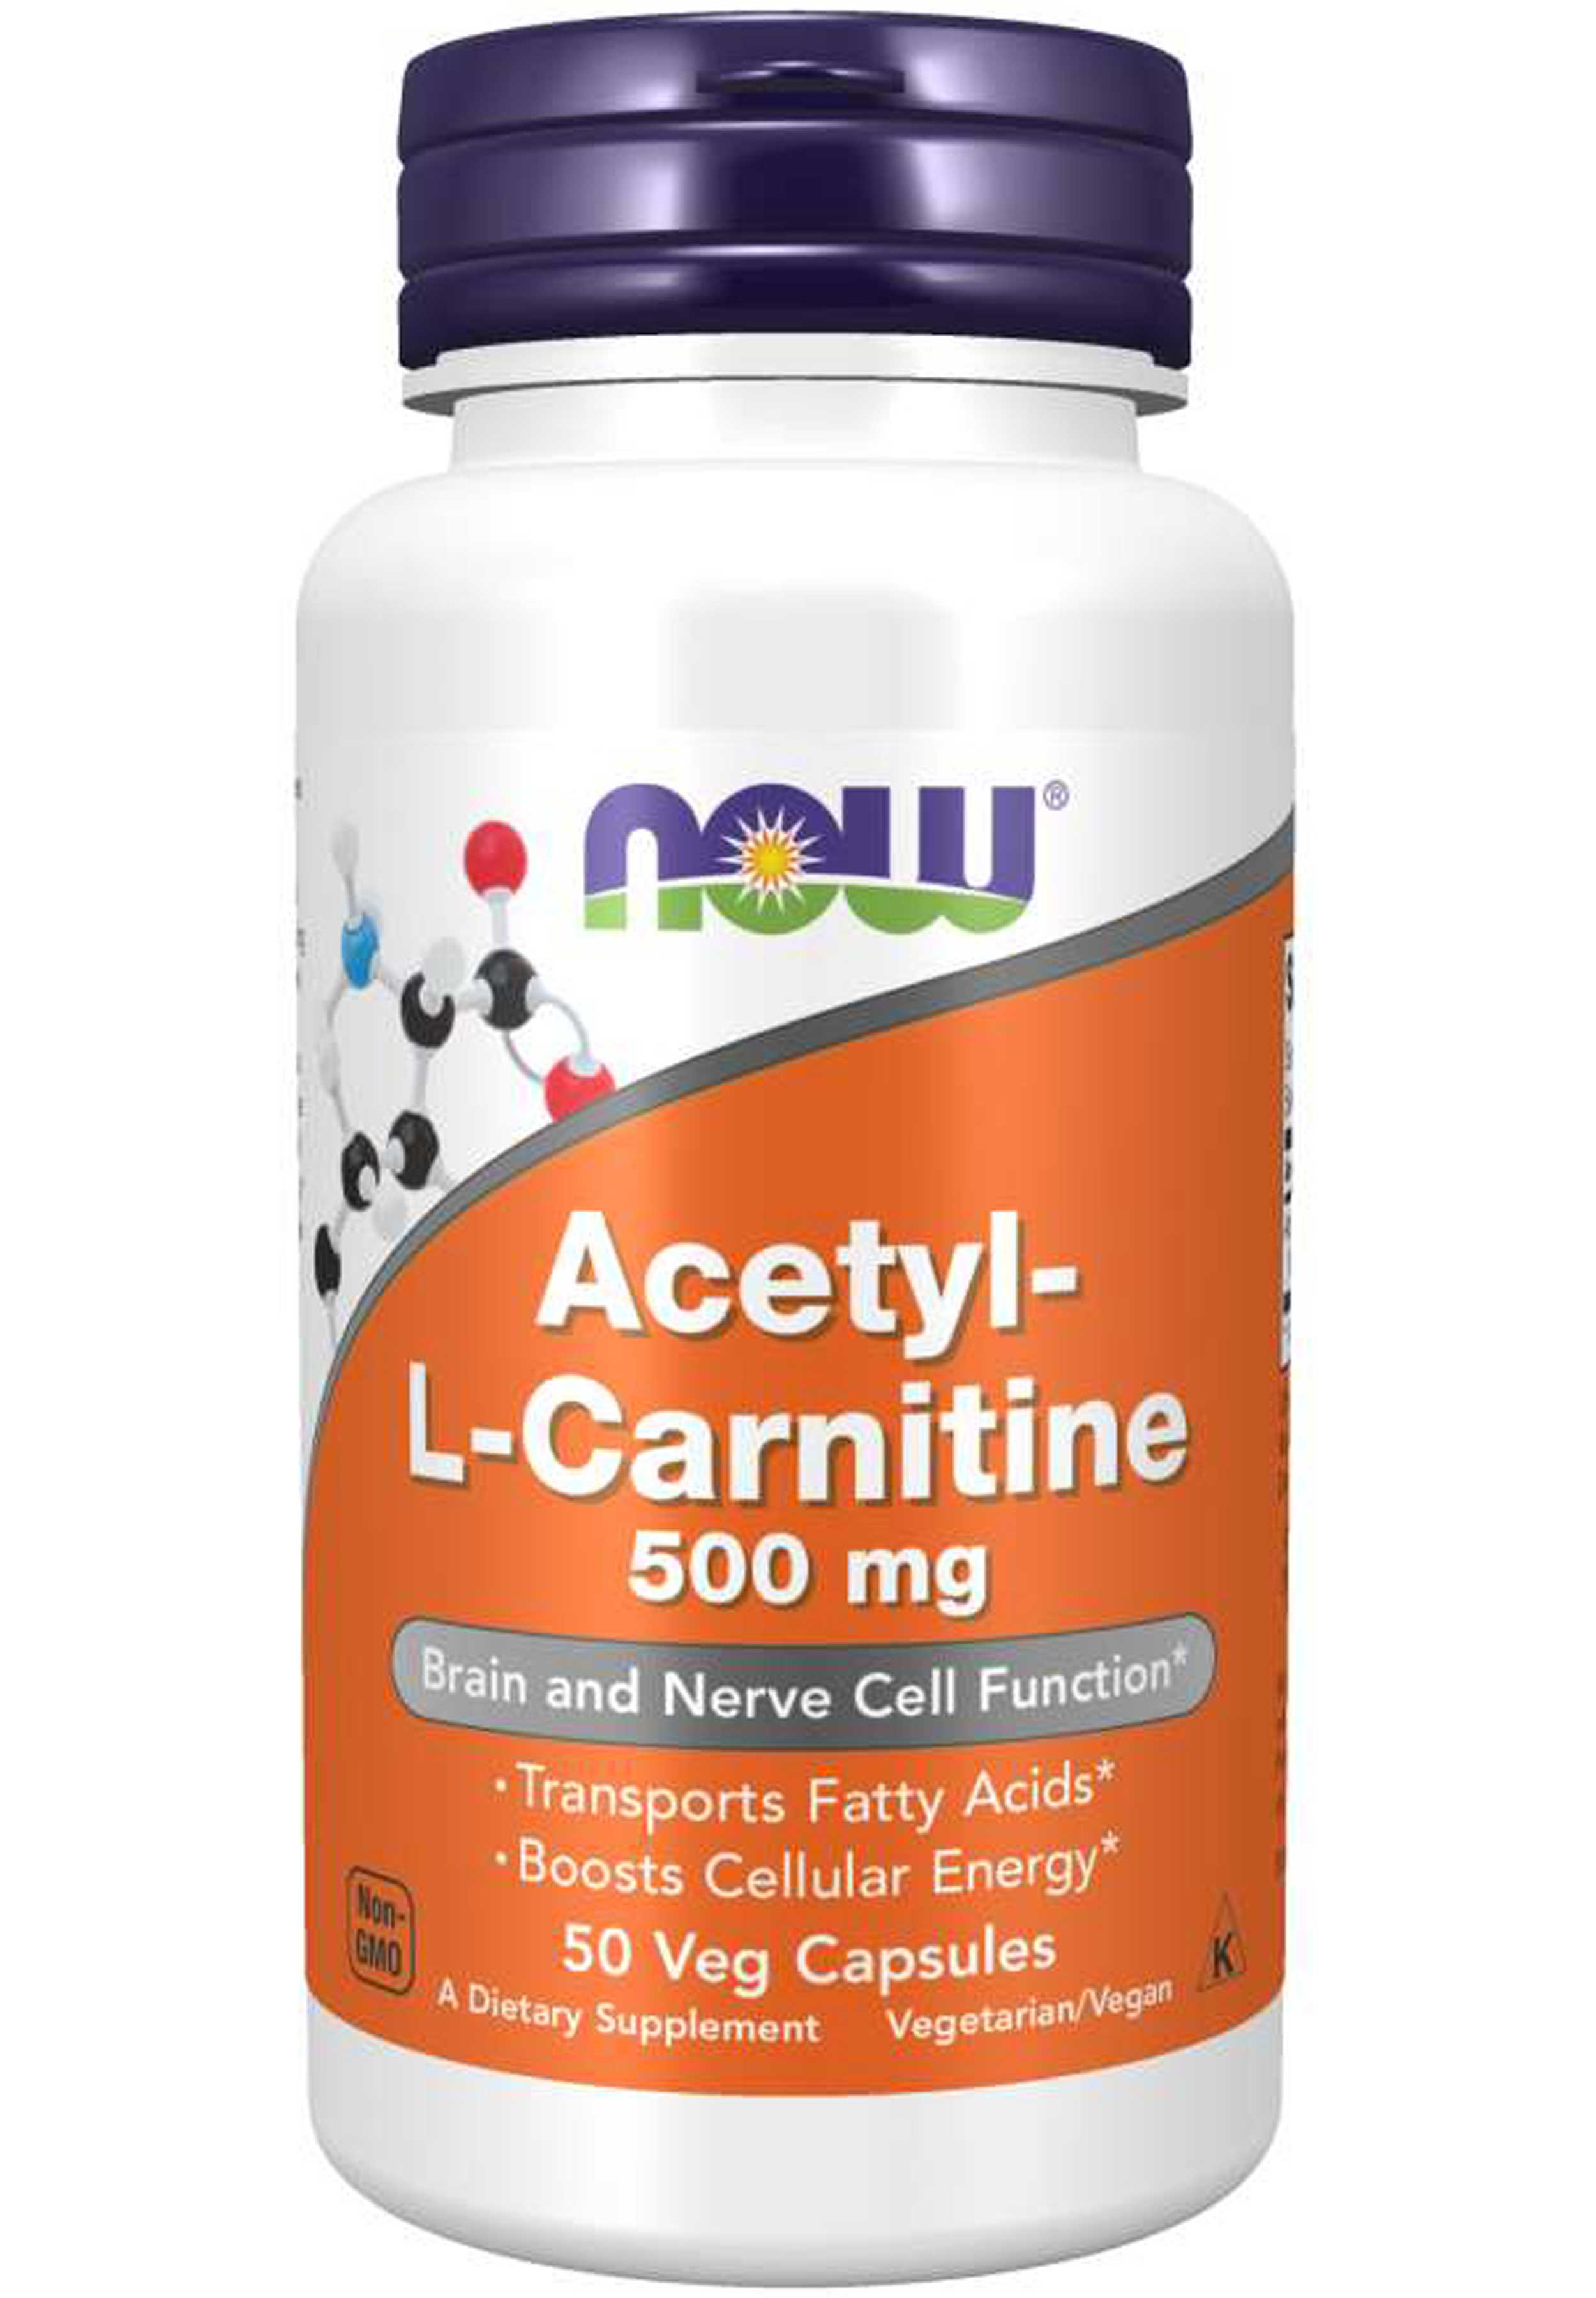 NOW Acetyl-L Carnitine 500 mg